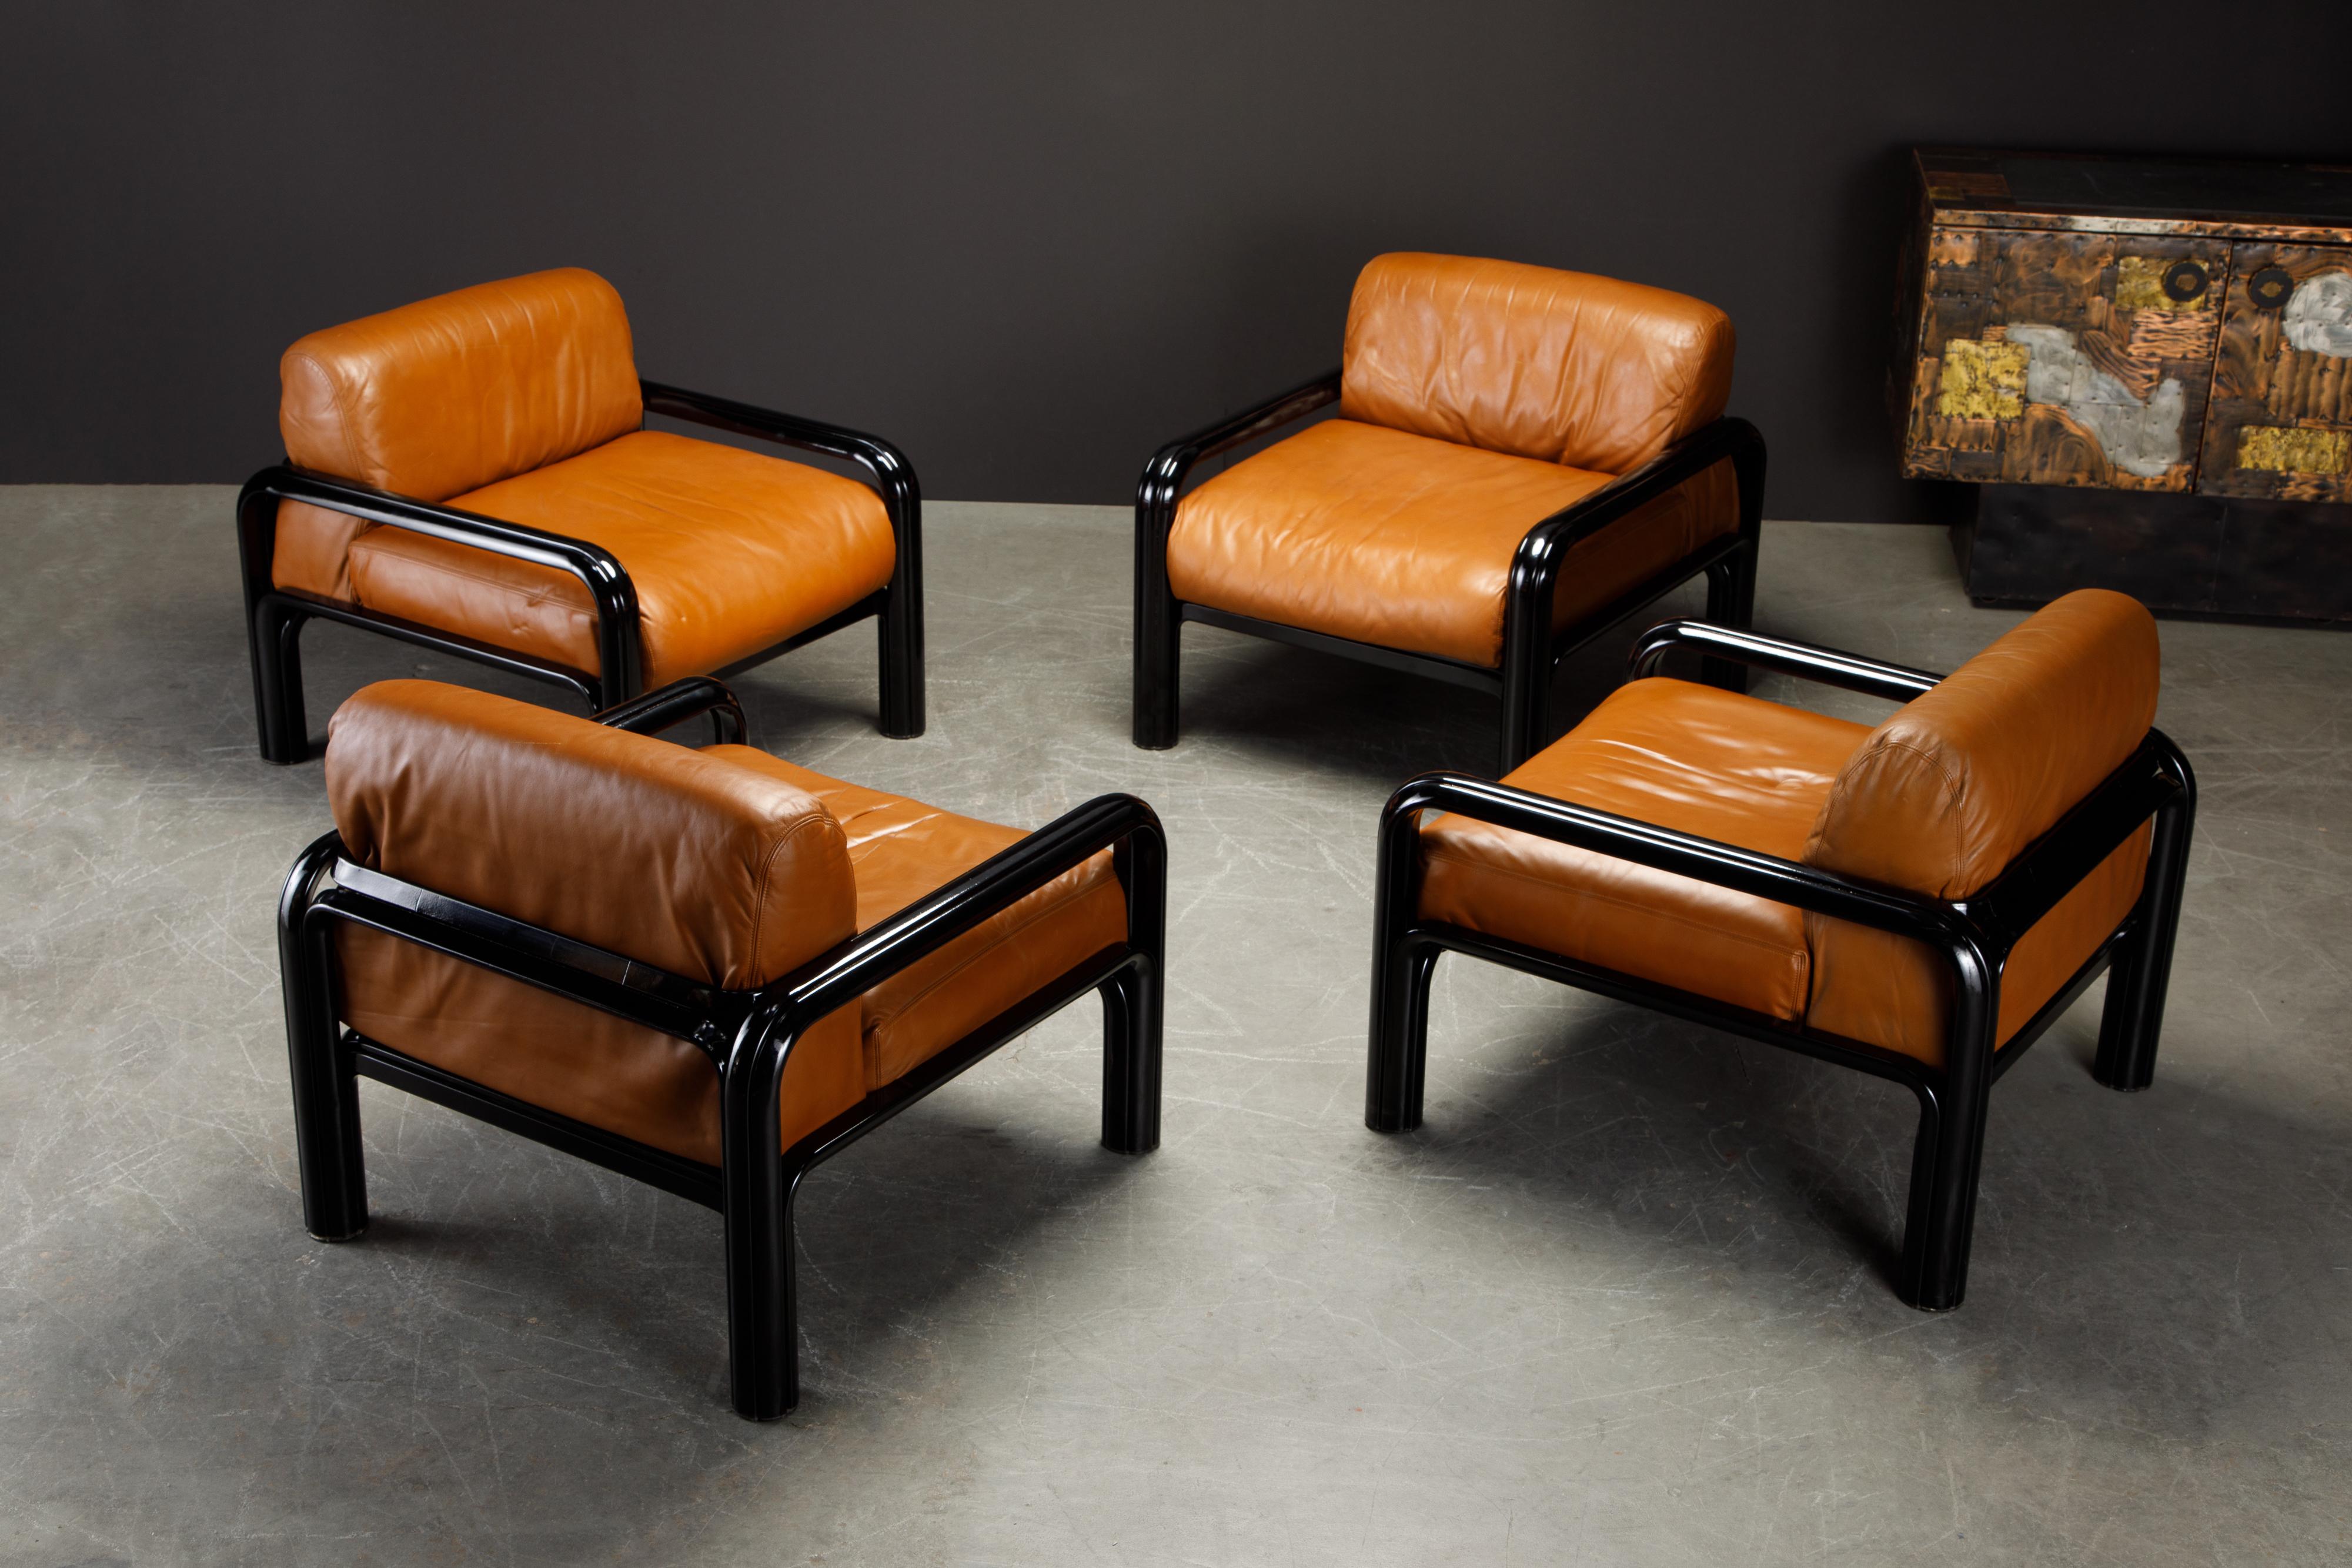 Late 20th Century Set of 4 Gae Aulenti Leather and Steel Lounge Chairs for Knoll, Signed 1980